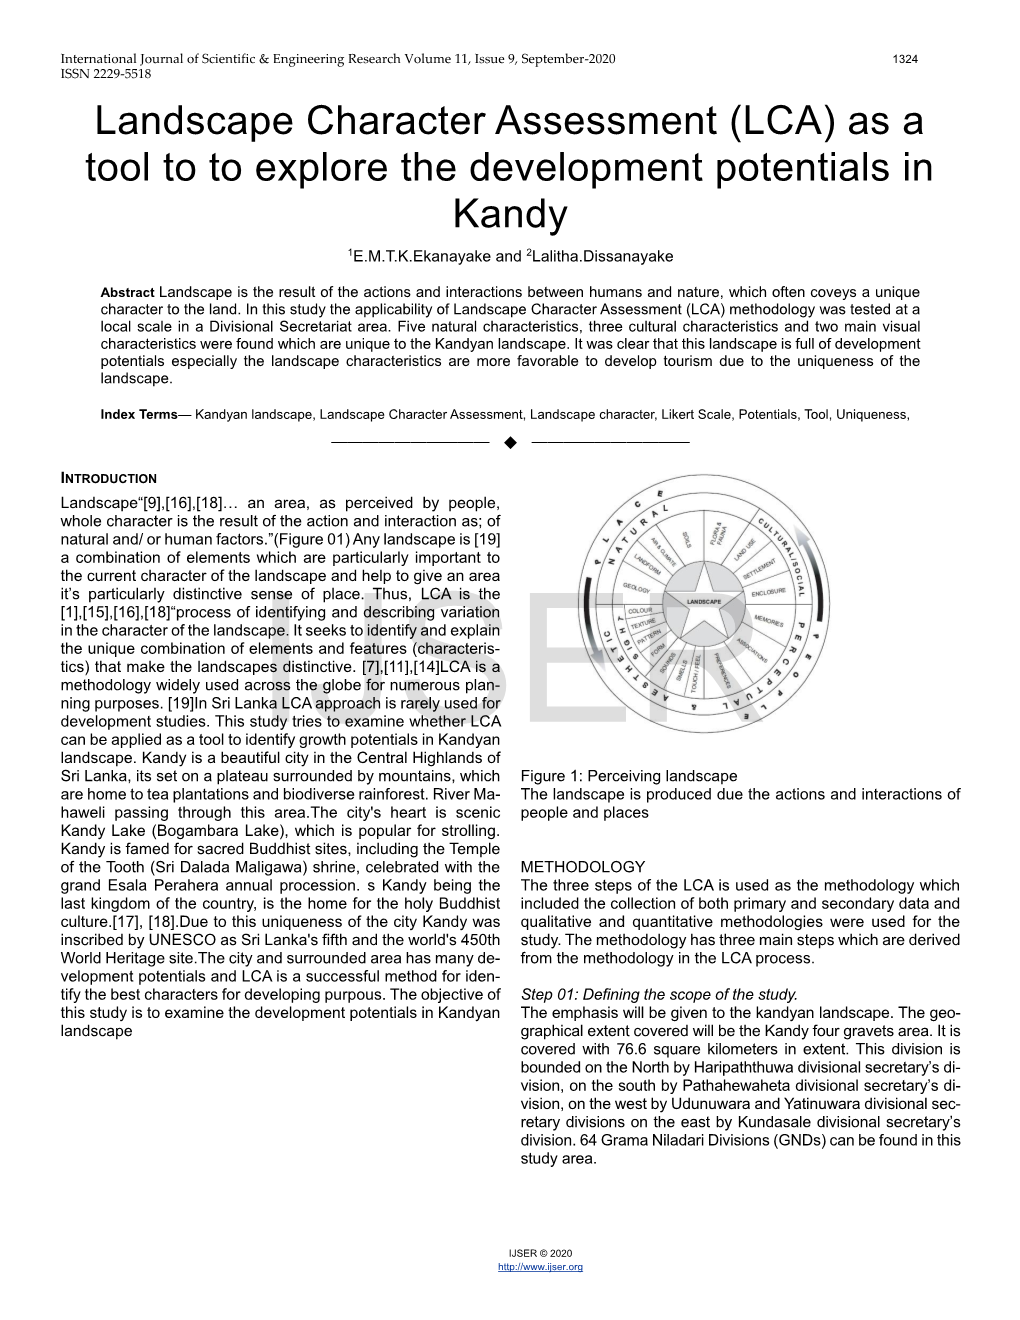 Landscape Character Assessment (LCA) As a Tool to to Explore the Development Potentials in Kandy 1E.M.T.K.Ekanayake and 2Lalitha.Dissanayake